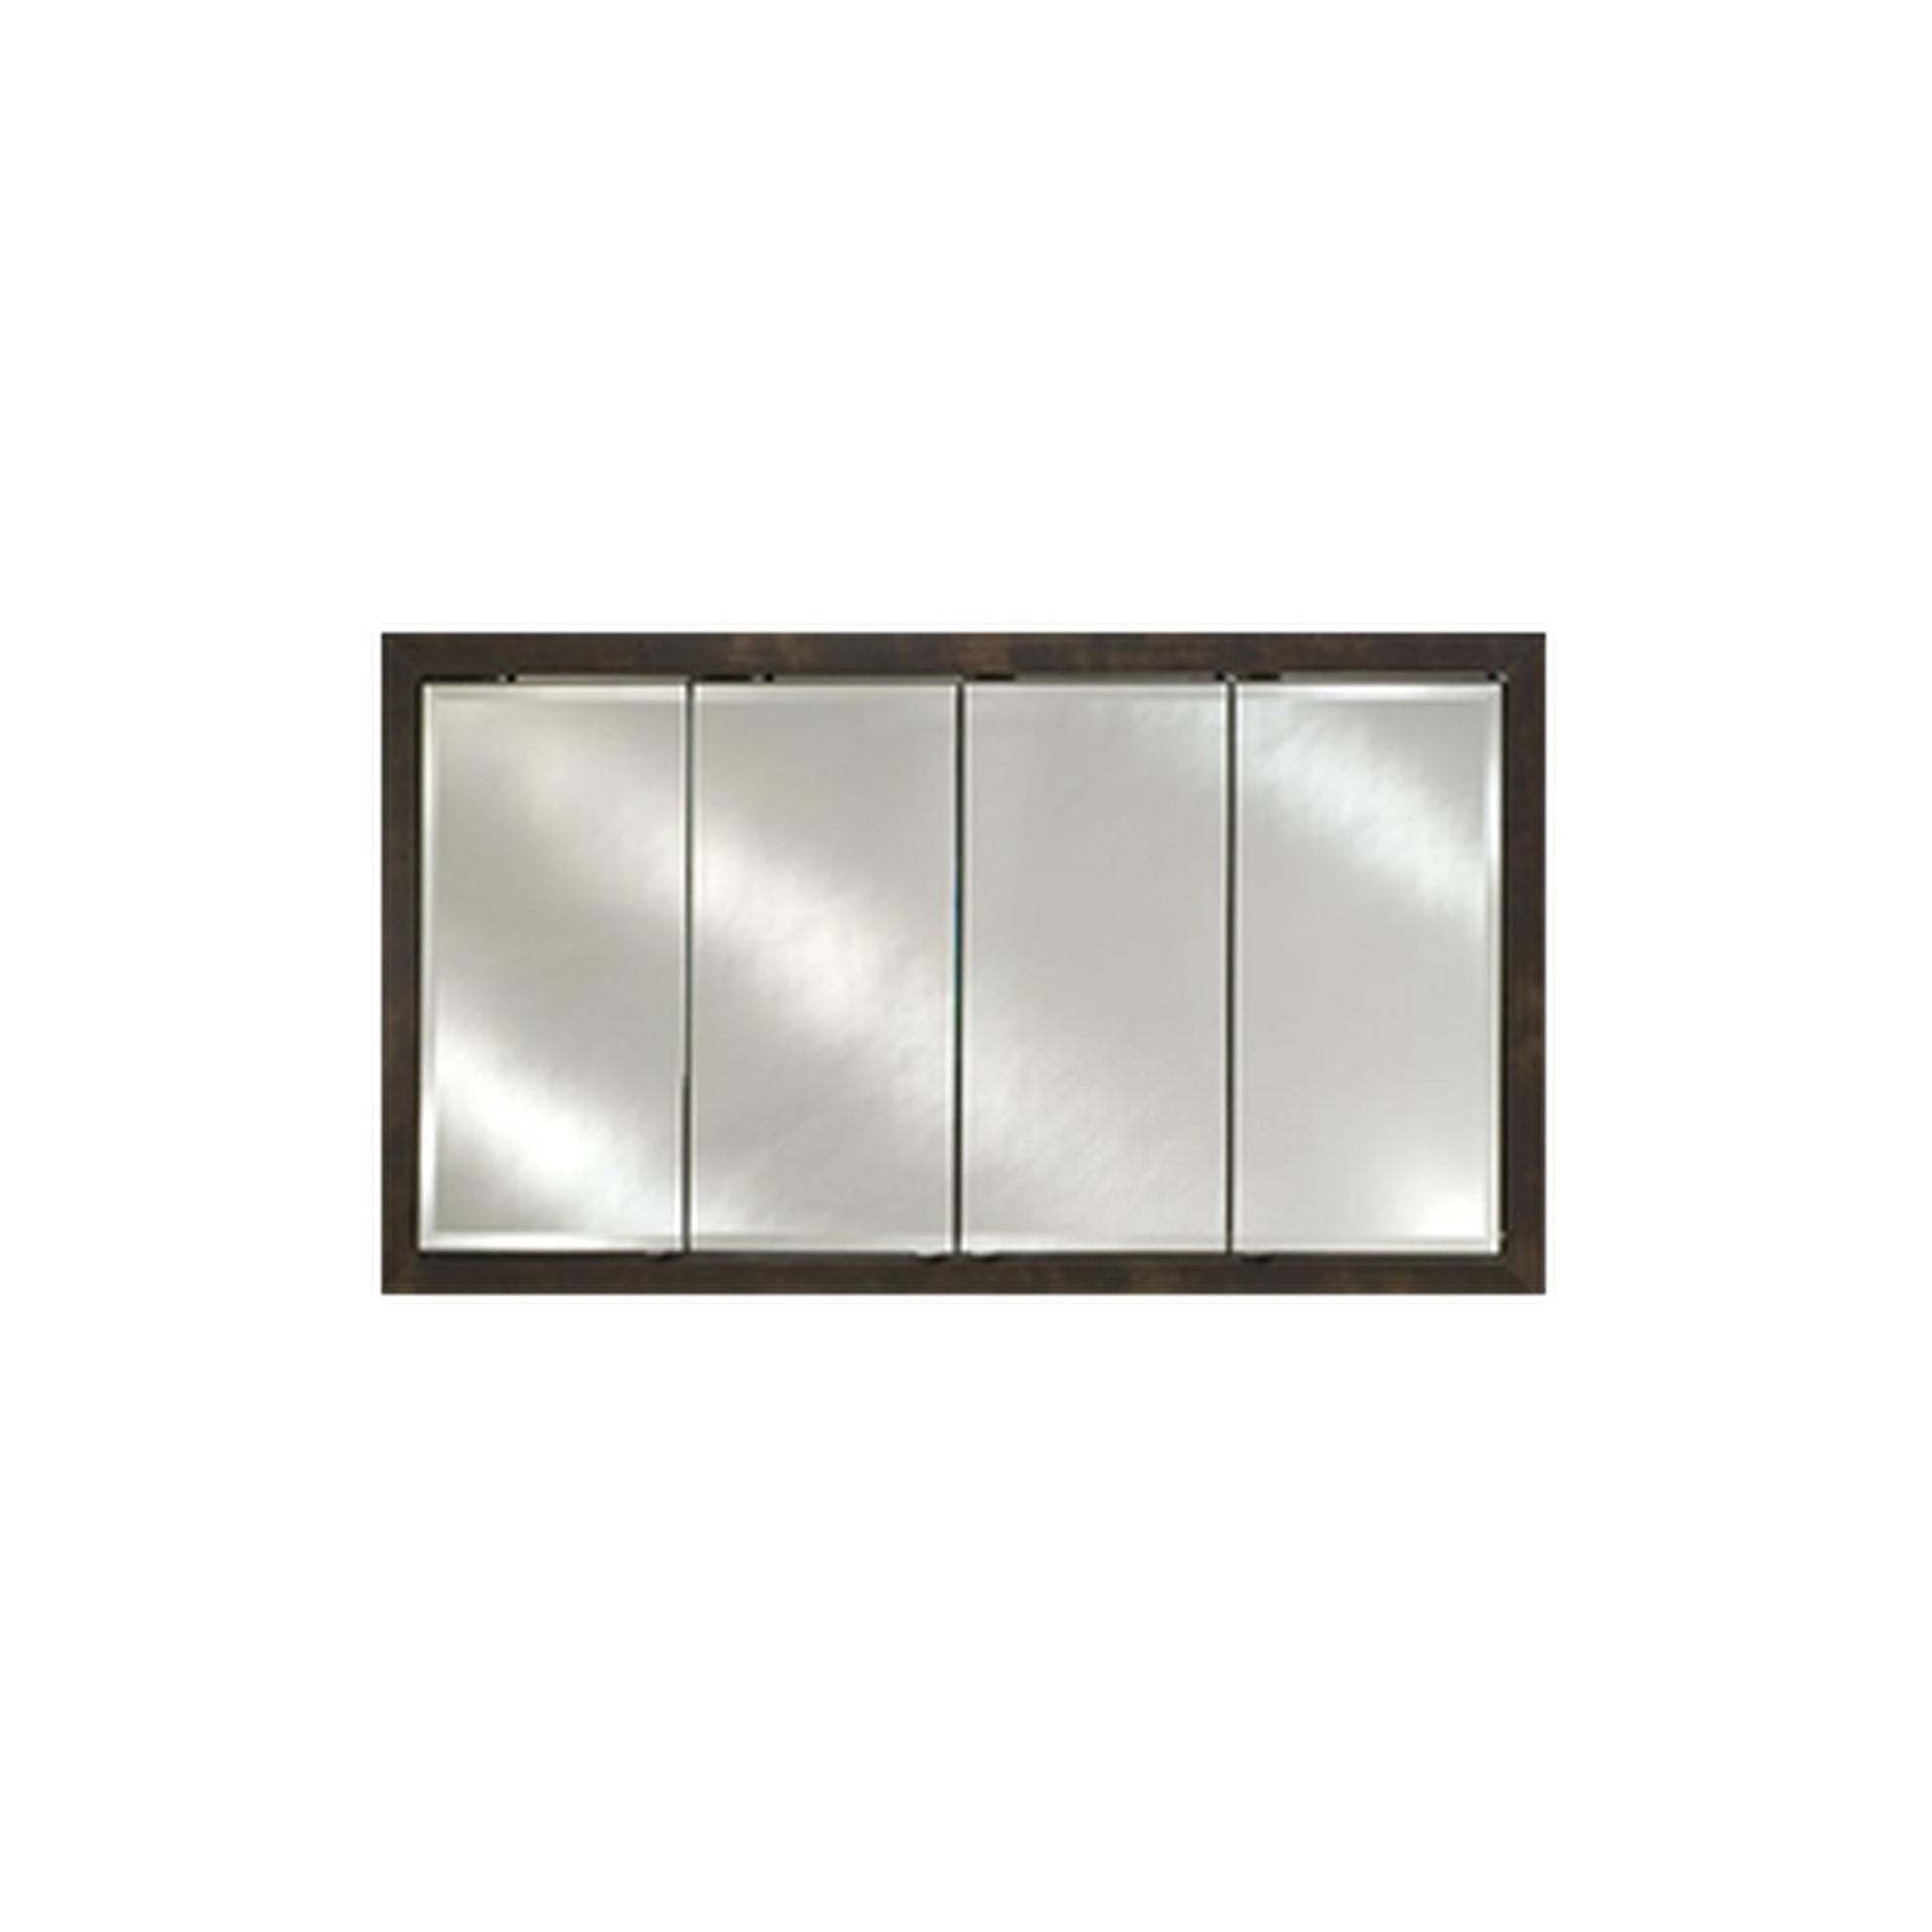 Afina Signature 63" x 36" Polished Glimmer-Flat Recessed Four Door Medicine Cabinet With Beveled Edge Mirror